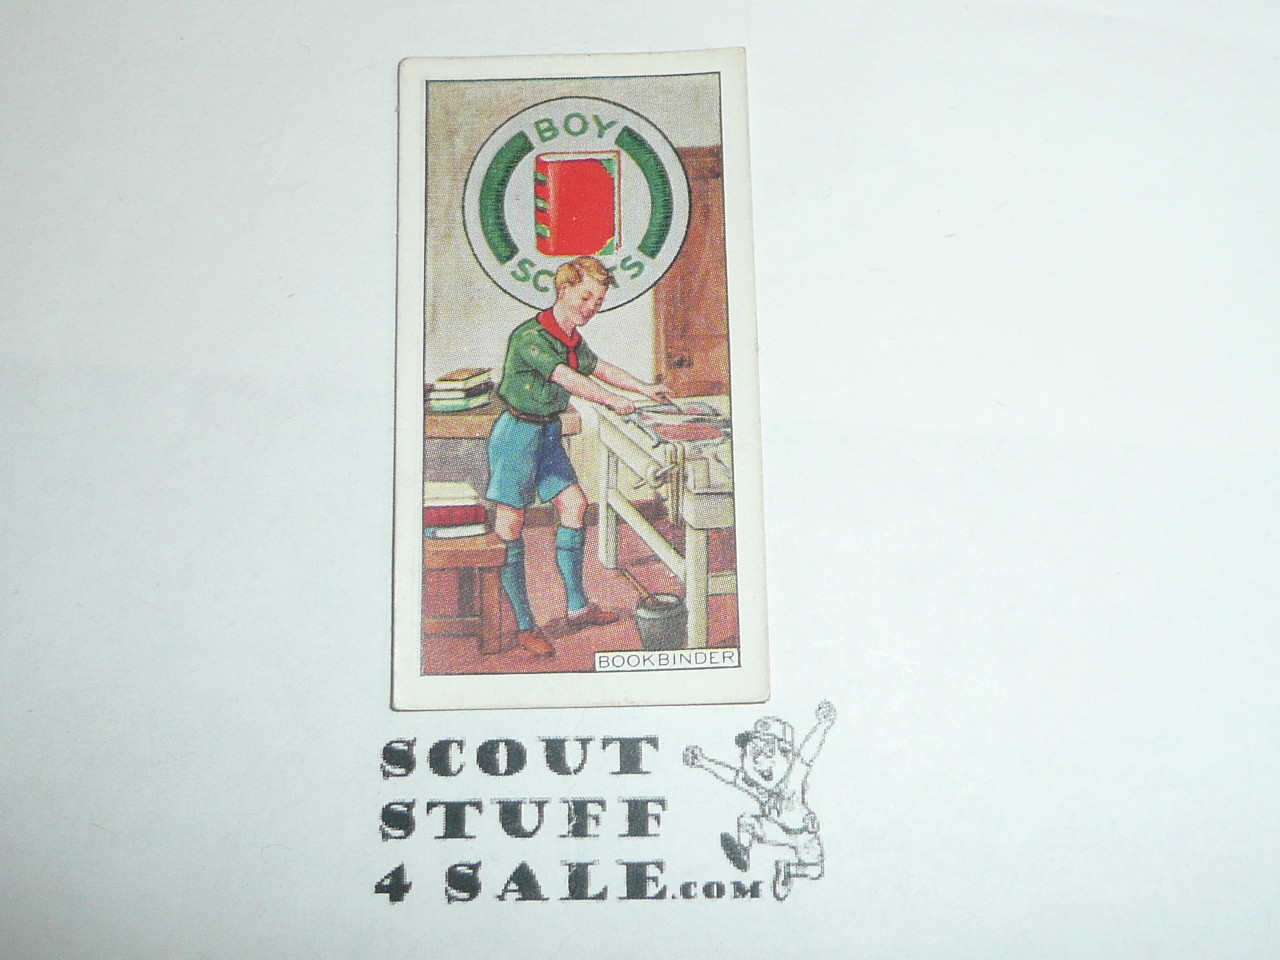 CWS Cigarette Company Premium Card, Boy Scout Badges Series of 50, Card #32 Bookbinder, 1939